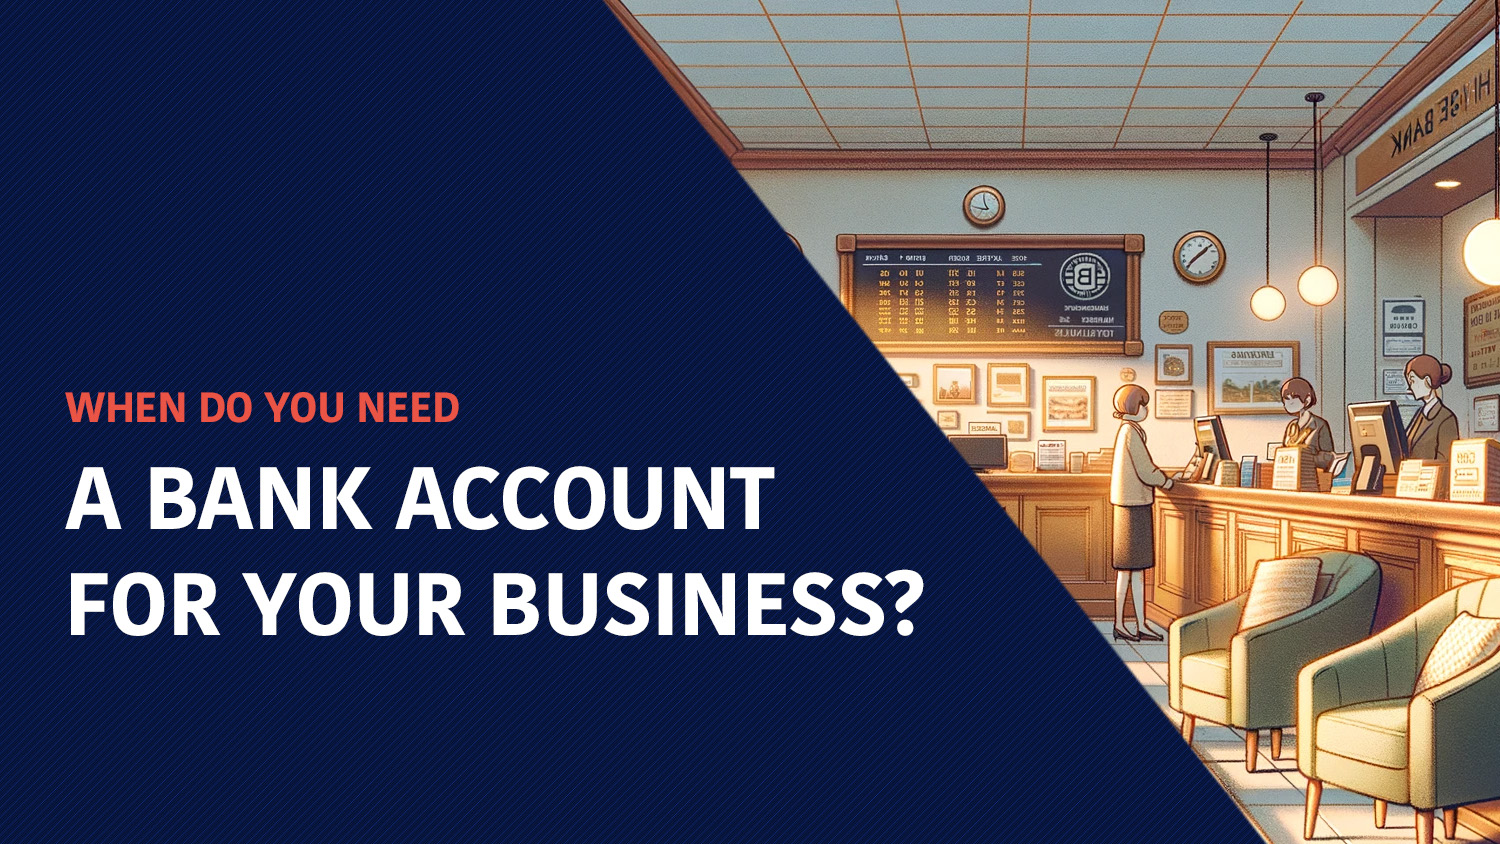 When do you need a bank account for your business?